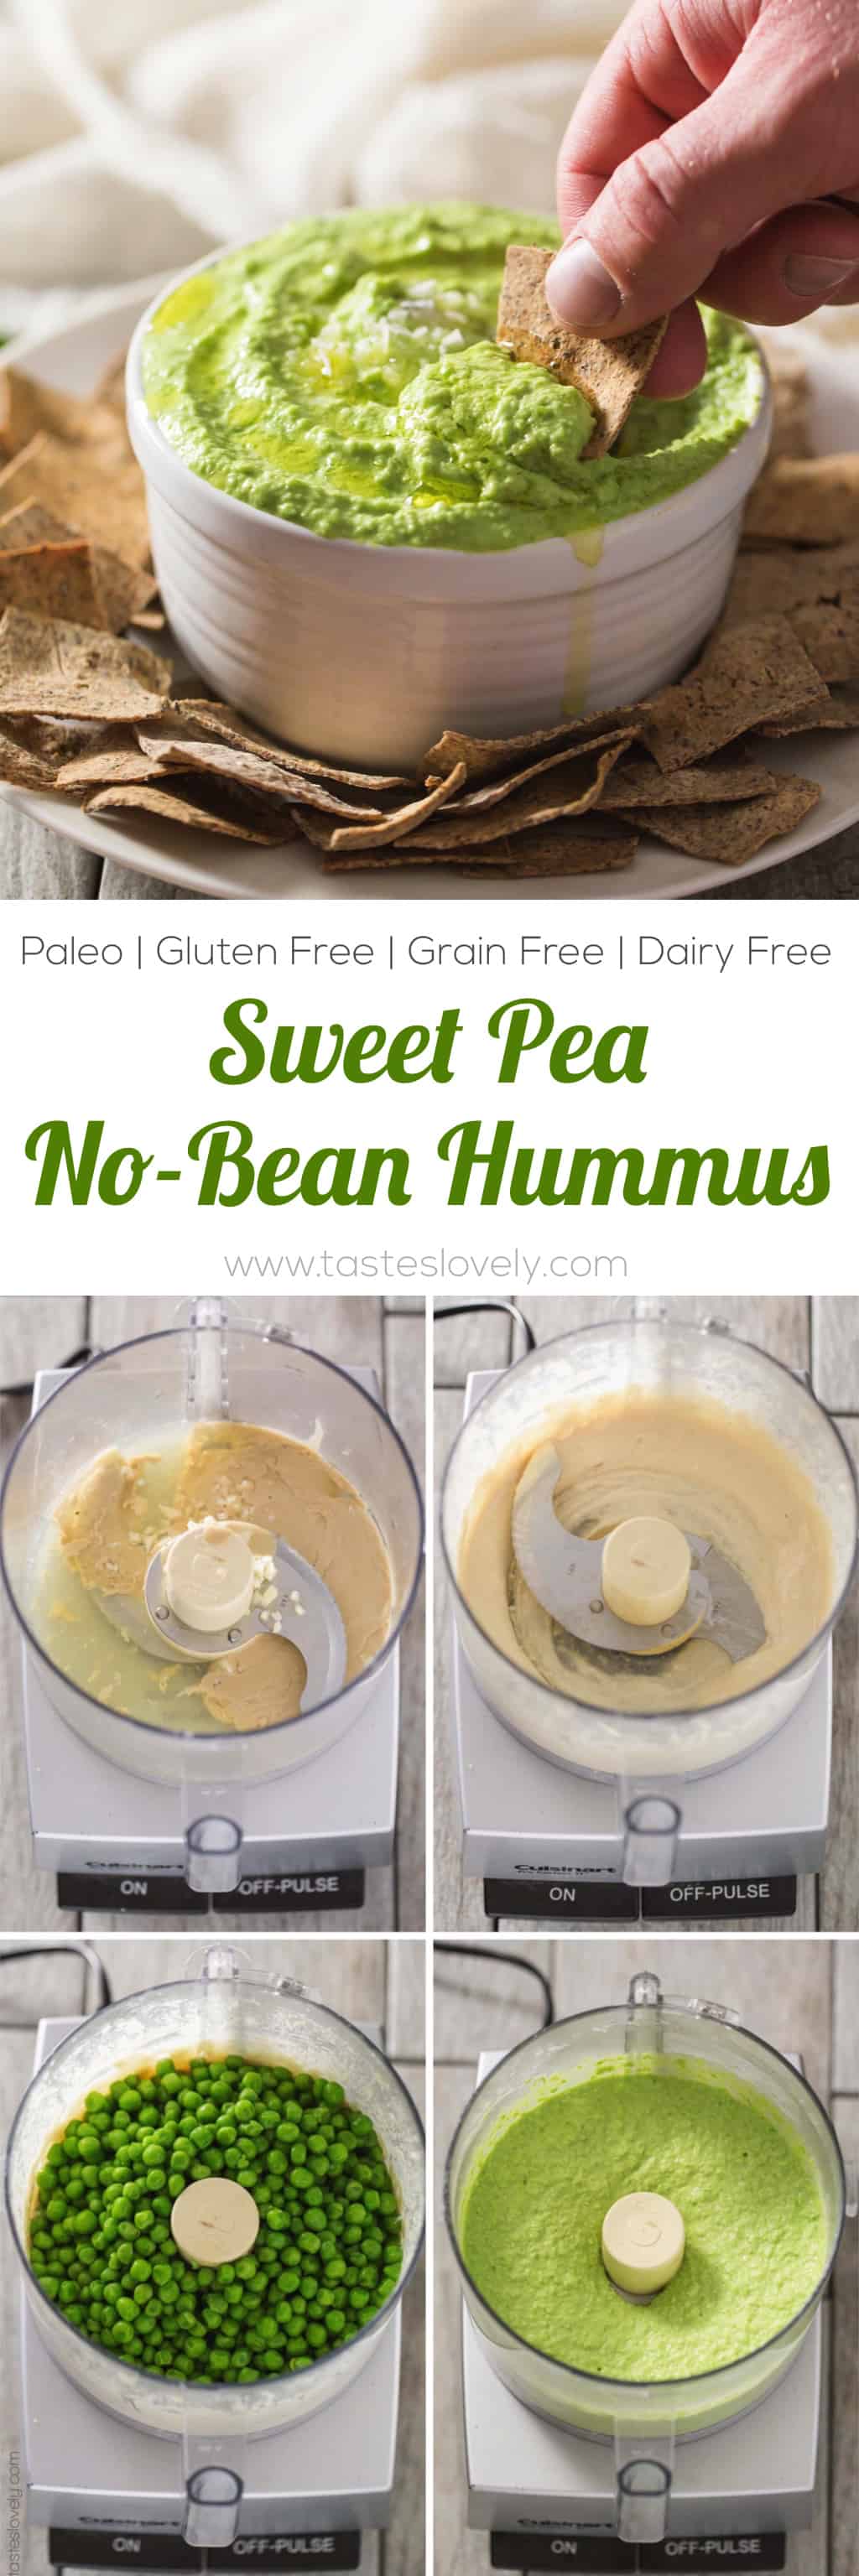 Paleo Sweet Pea No-Bean Hummus - a healthy spring appetizer served with my paleo almond pulp crackers. Paleo, gluten free, grain free, dairy free, sugar free.